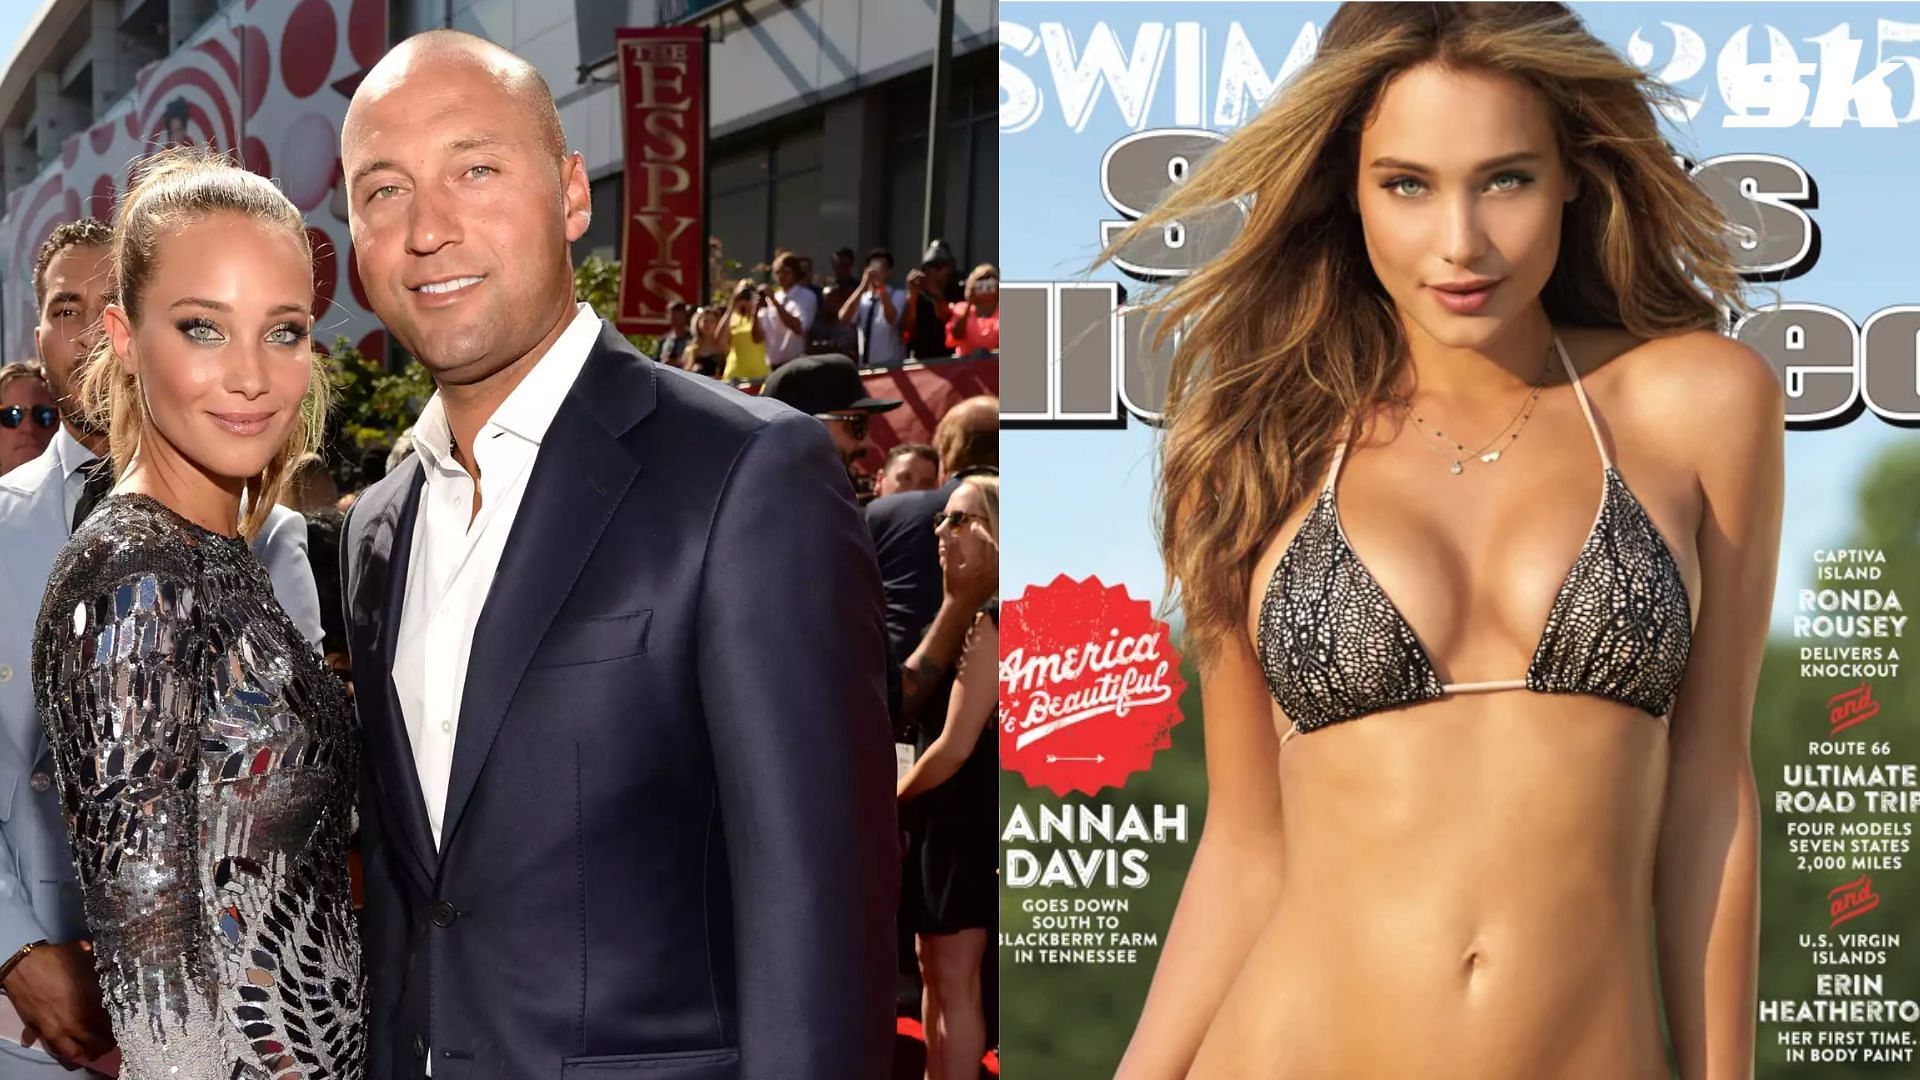 Derek Jeter’s wife Hannah Jeter "I think you're making it look a lot